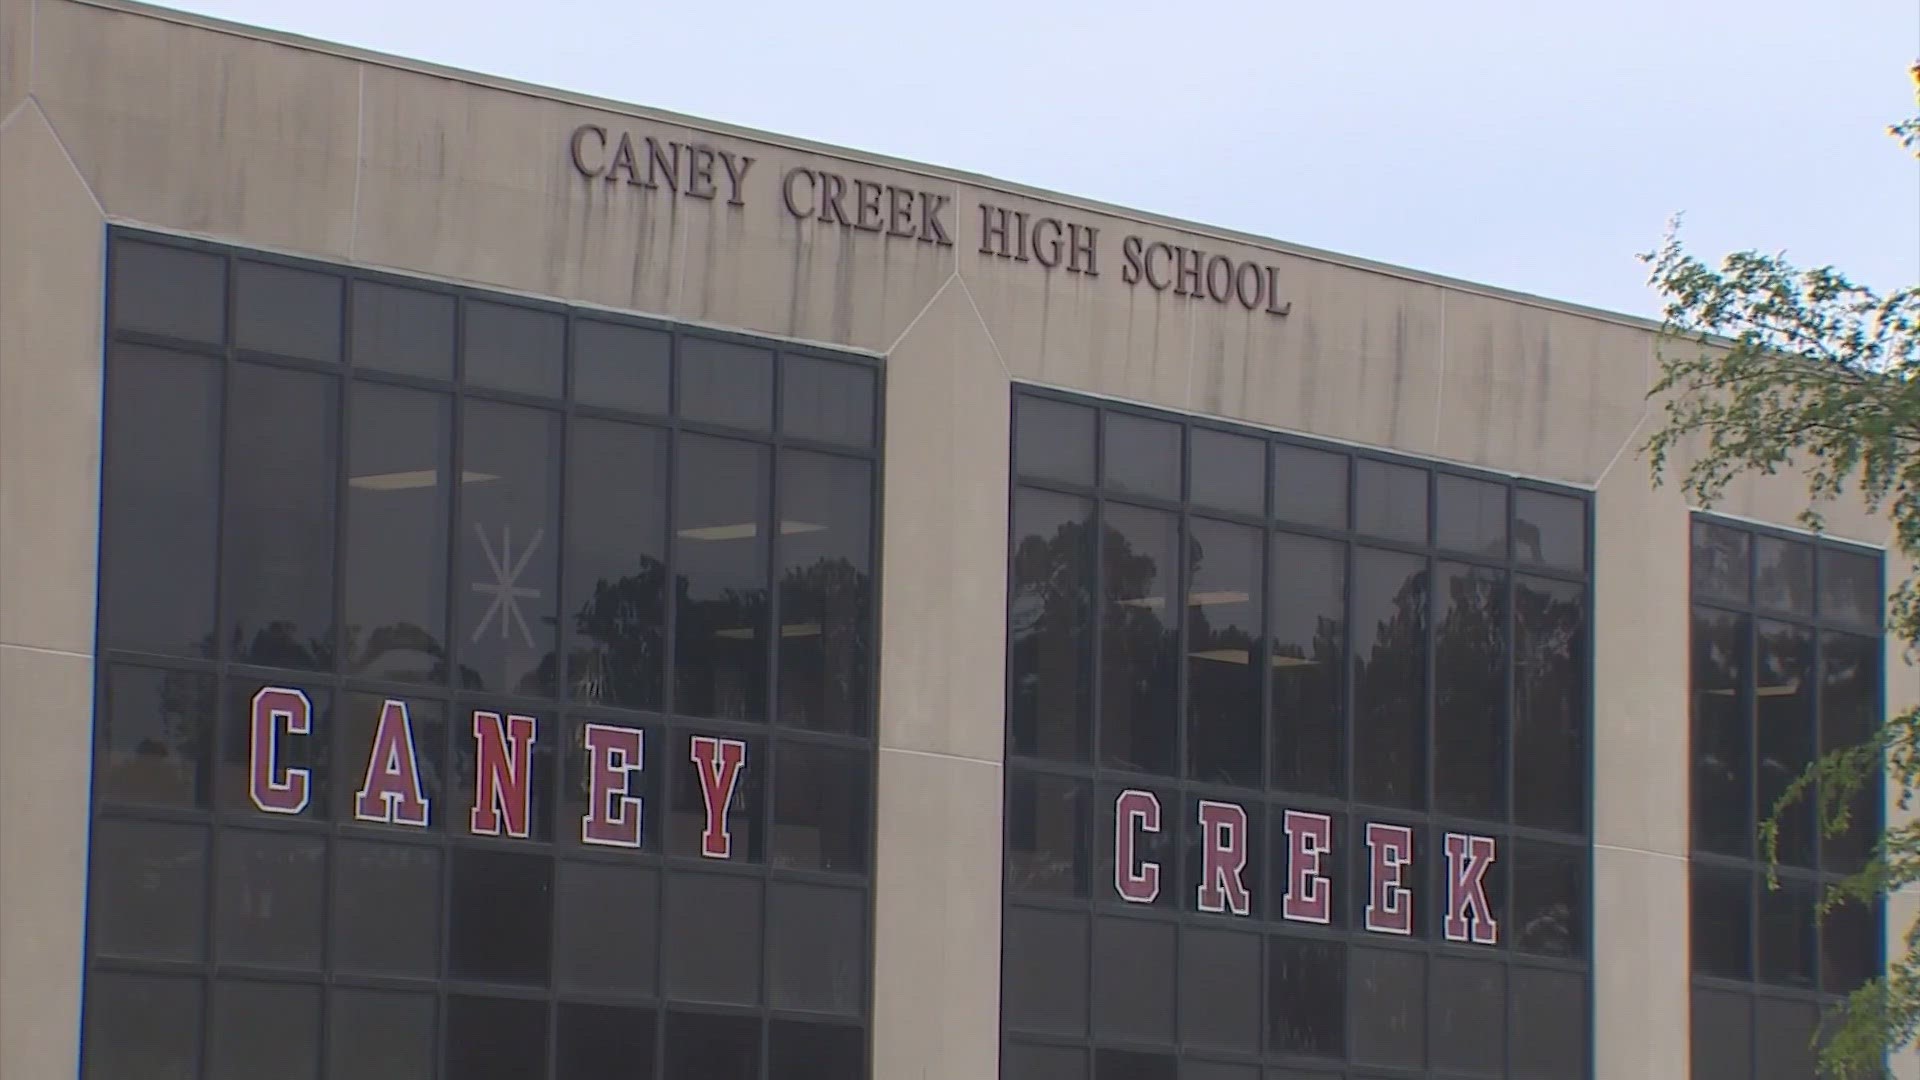 A student confessed to using "Fart Spray" to cause the foul odor that happened at Caney Creek High School, according to Principal Jeff Stichler.